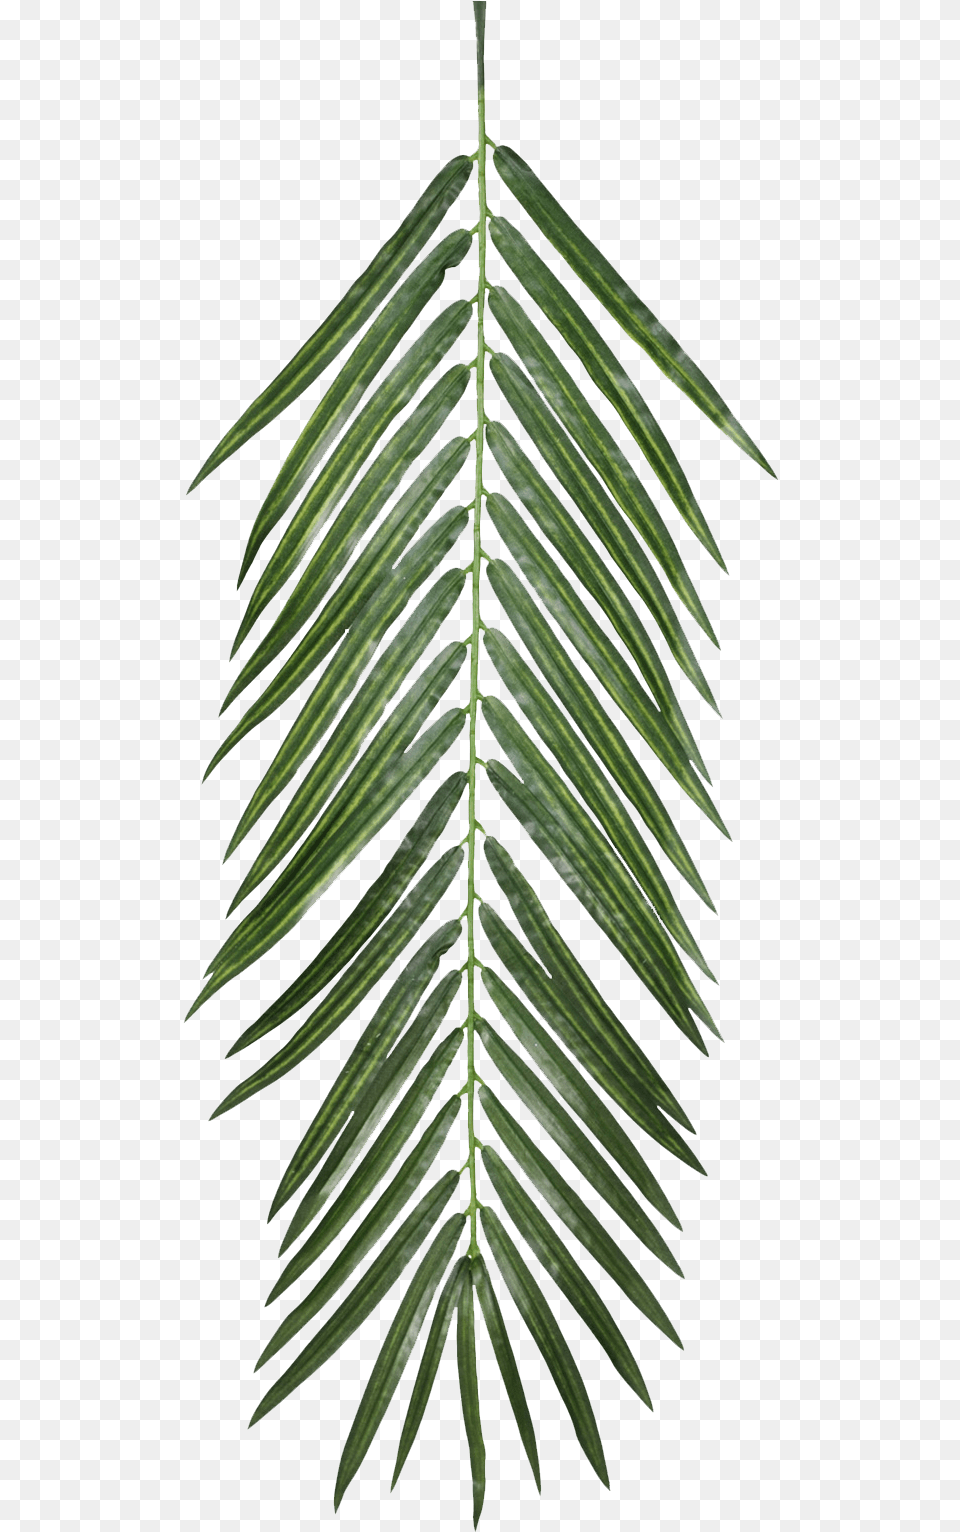 Download The Texture Of Foliage Palm Leaf Texture Drawing Of Palm Trees Aesthetic, Plant, Tree, Palm Tree, Fern Free Png